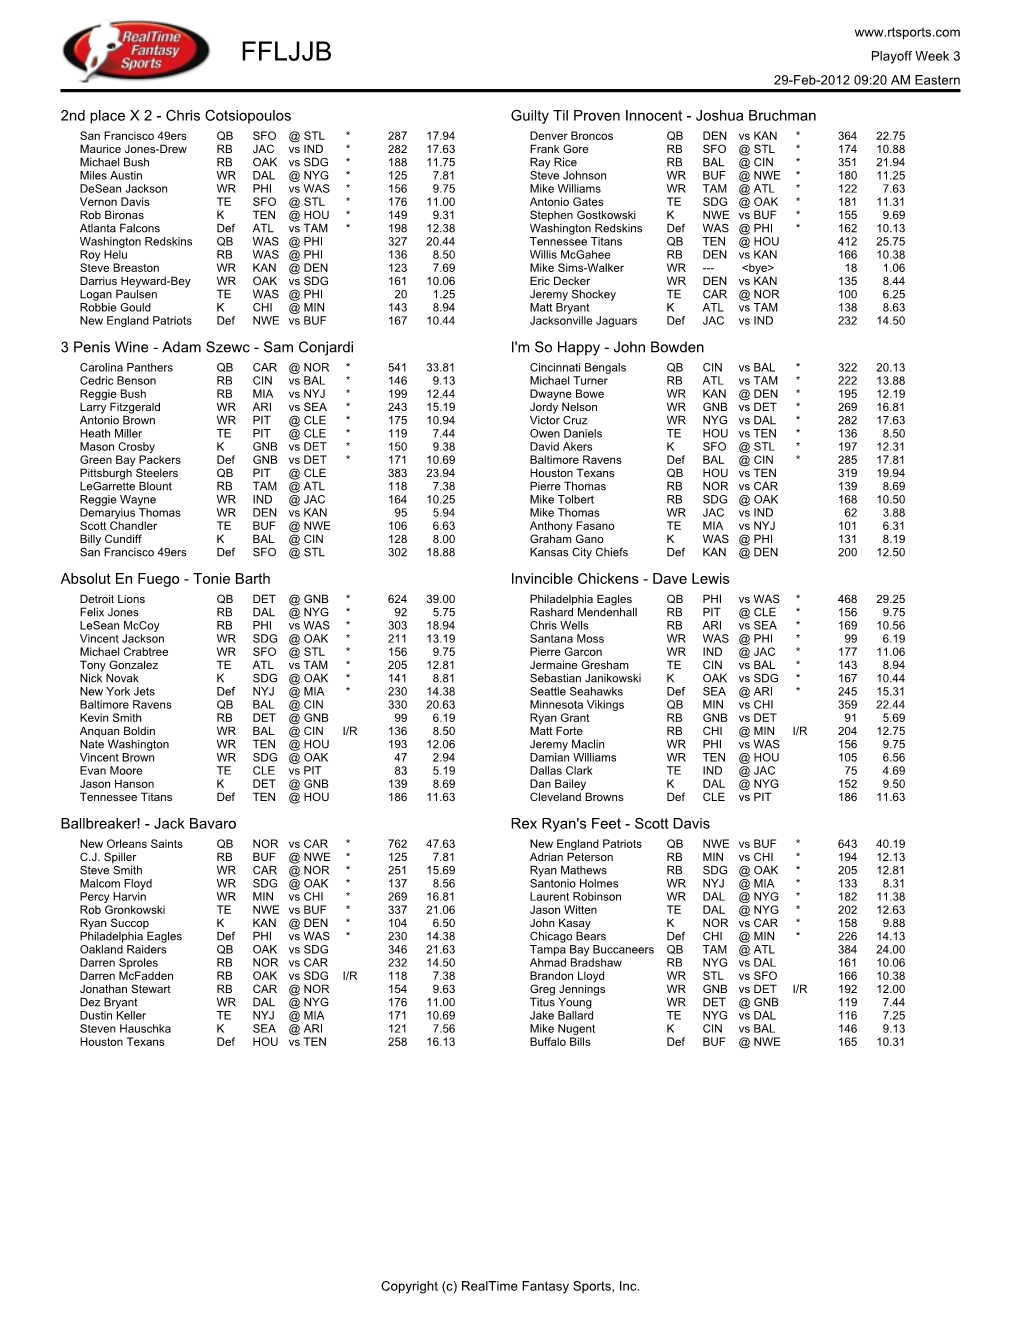 Final Rosters